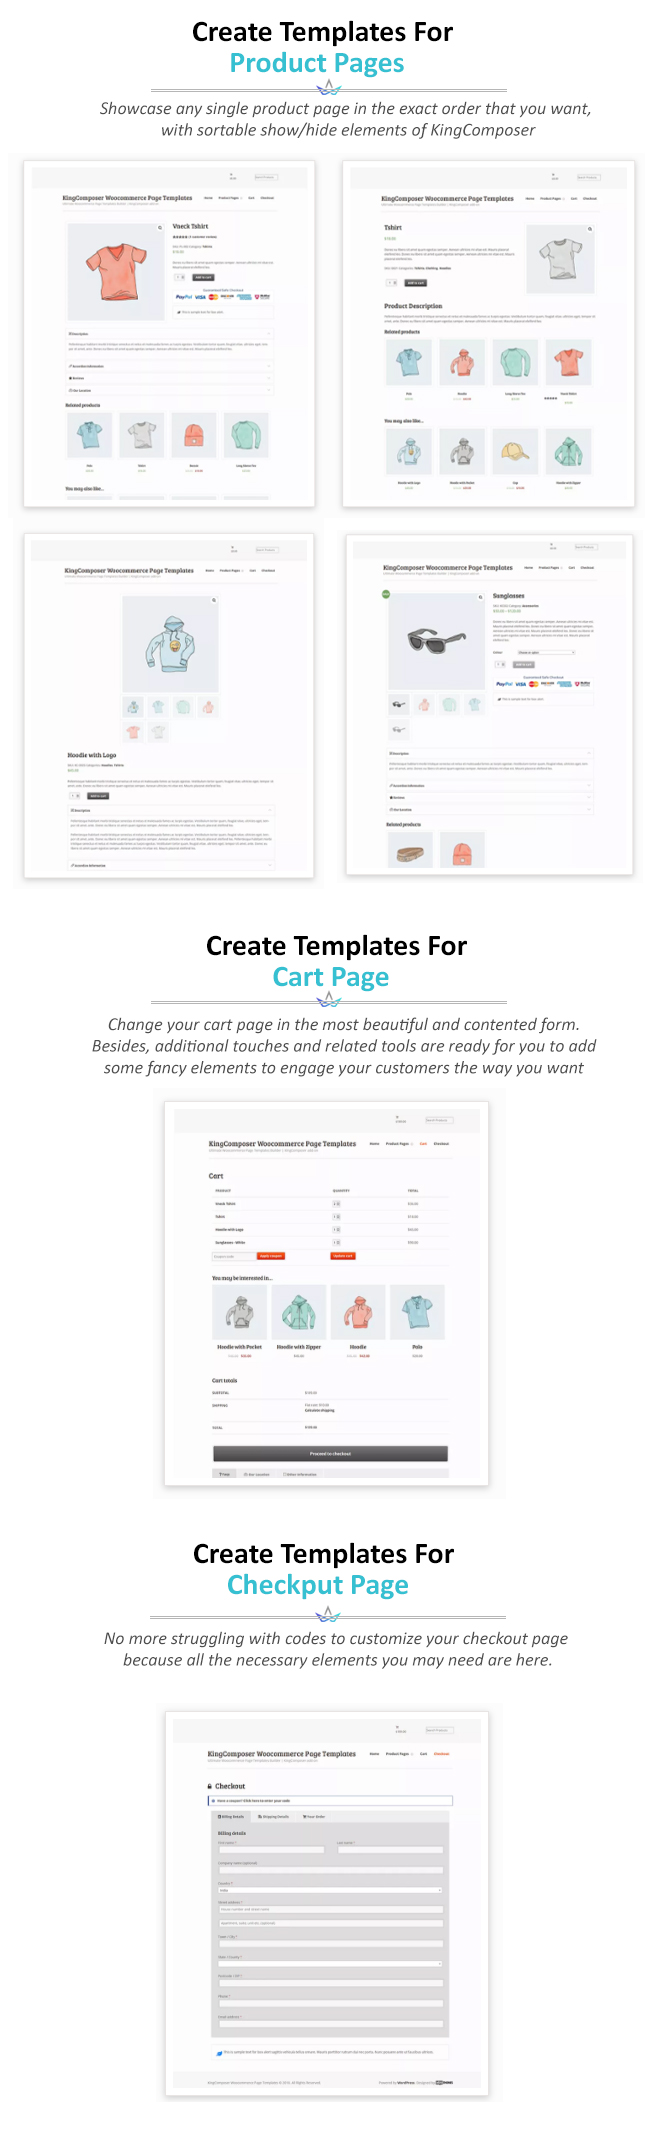 Ultimate Woocommerce Page Templates Builder | KingComposer add-on - 1